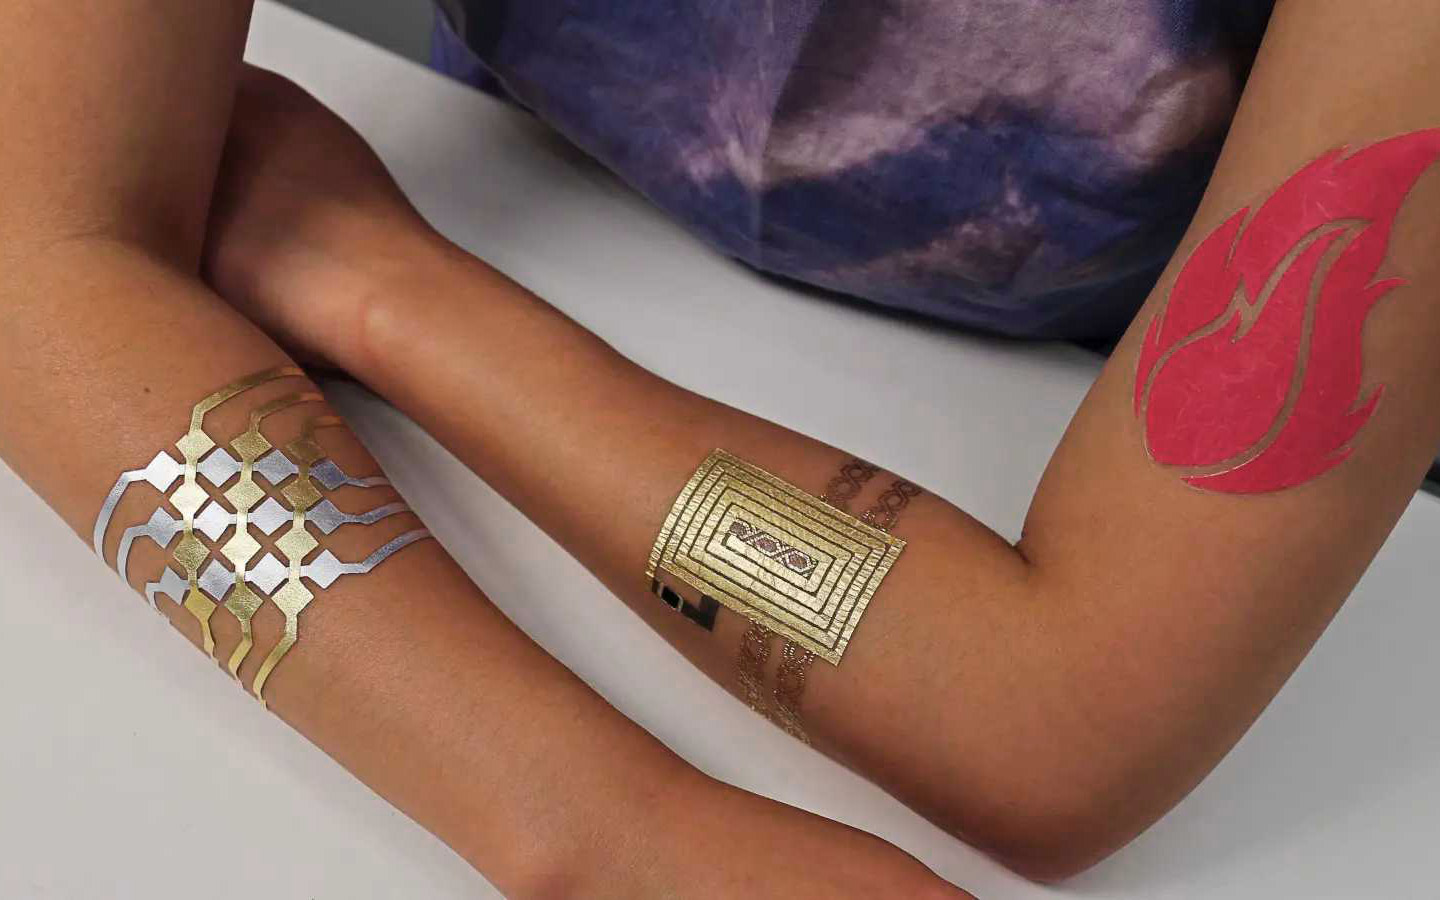 Smart tattoos technology on your skin